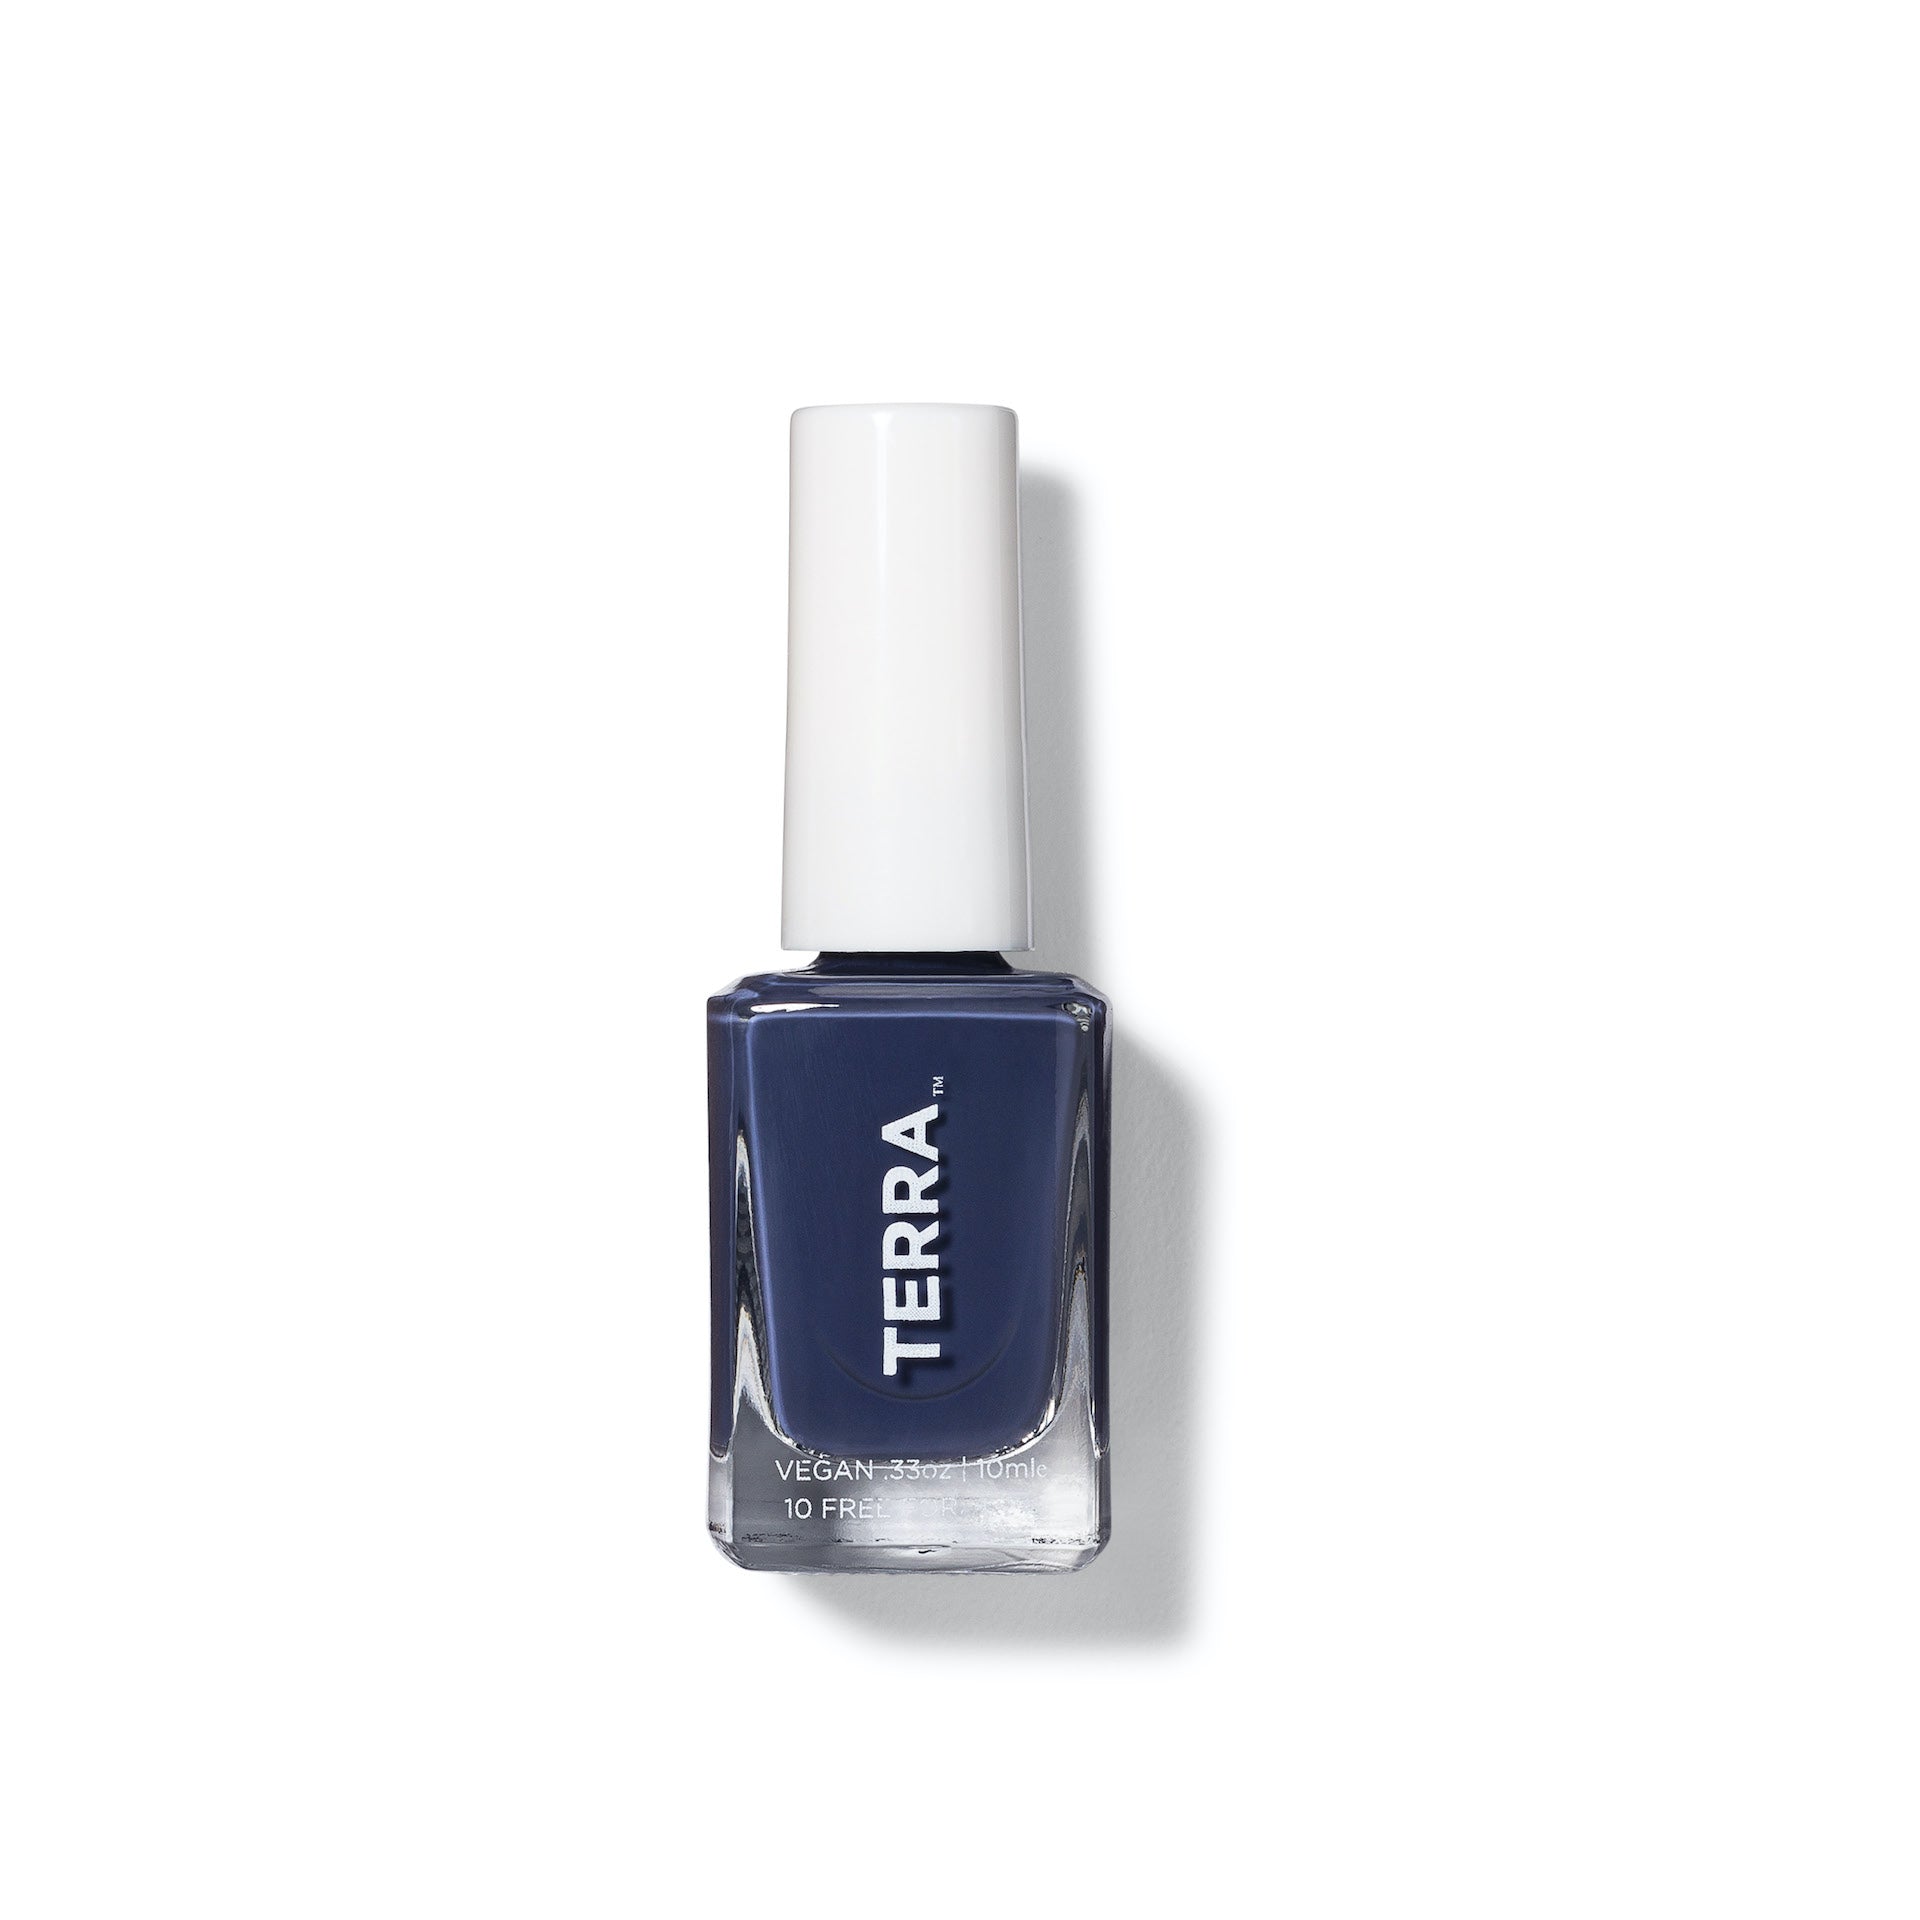 CND nail polish that matches your favorite pair of blue jeans! | Nails, Cnd nail  polish, Nail polish